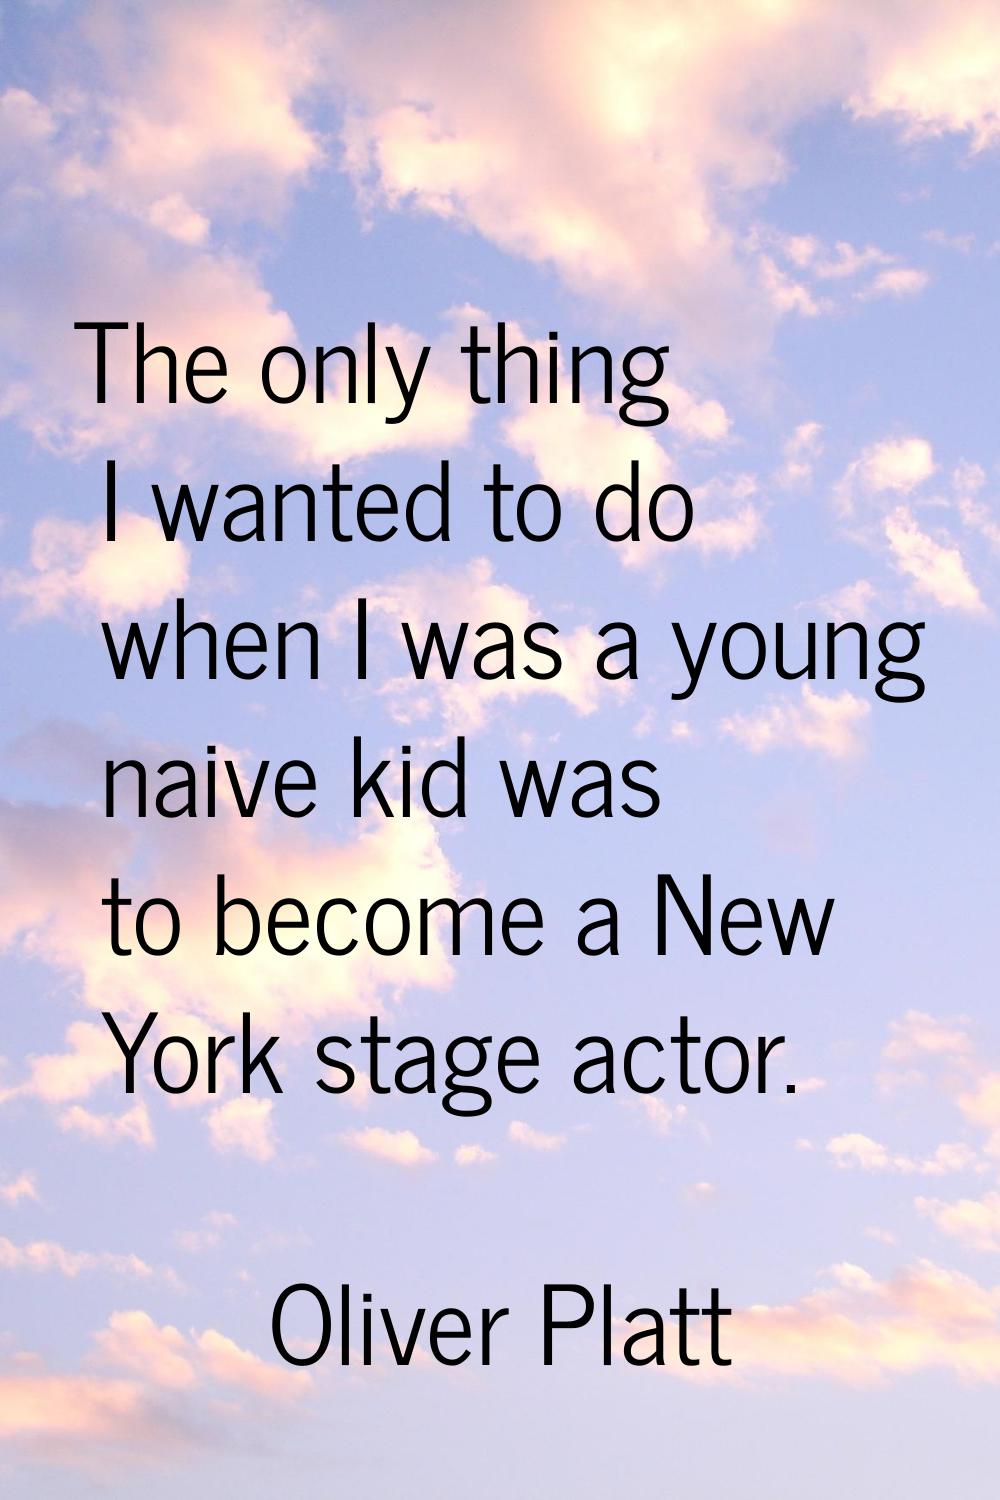 The only thing I wanted to do when I was a young naive kid was to become a New York stage actor.